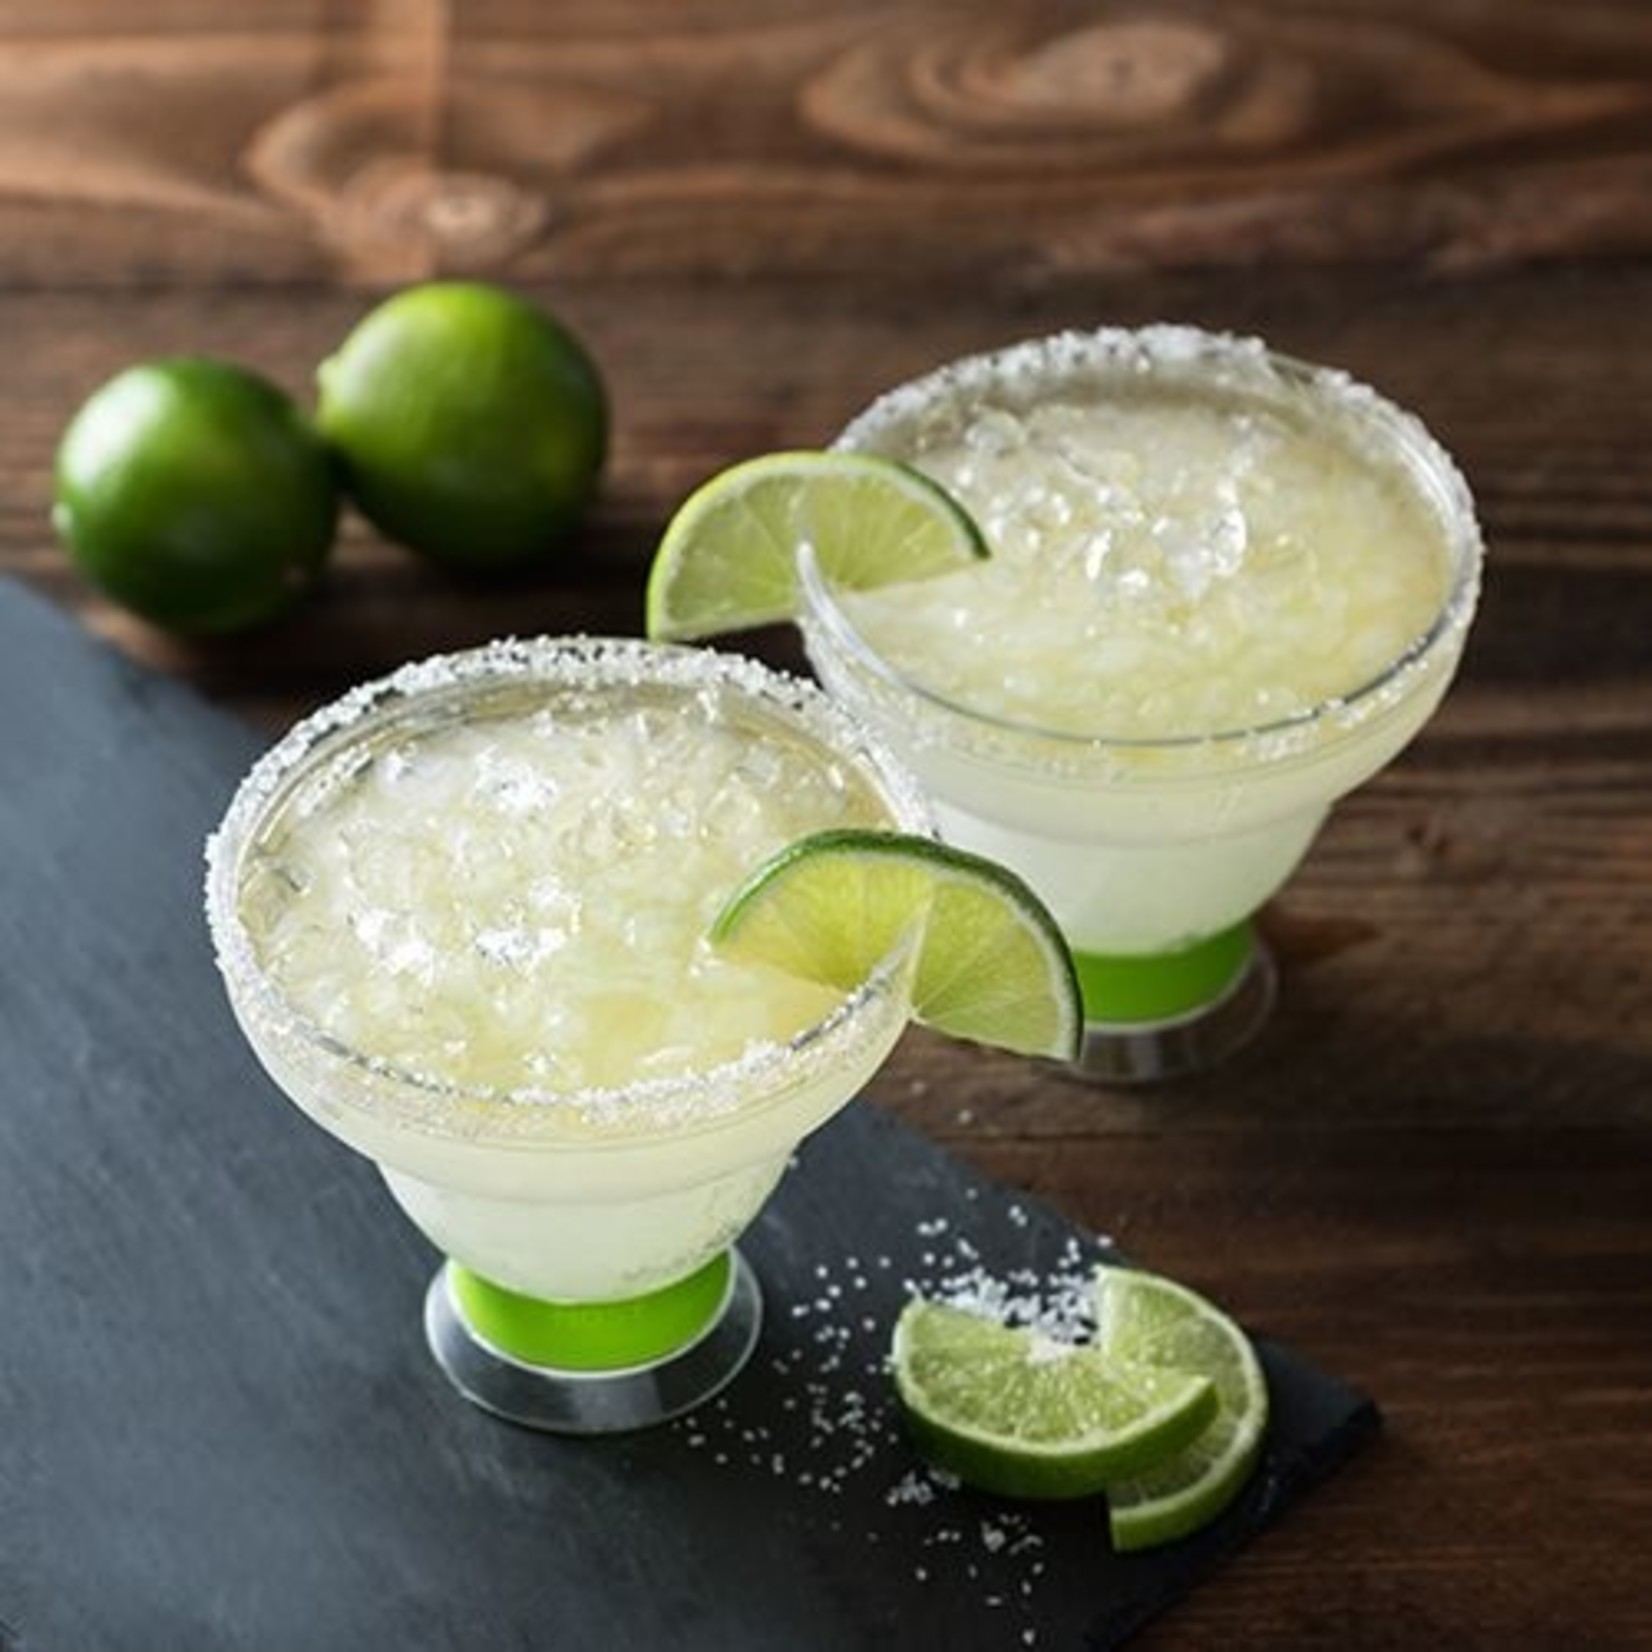 Host Margarita FREEZE Cooling Cup